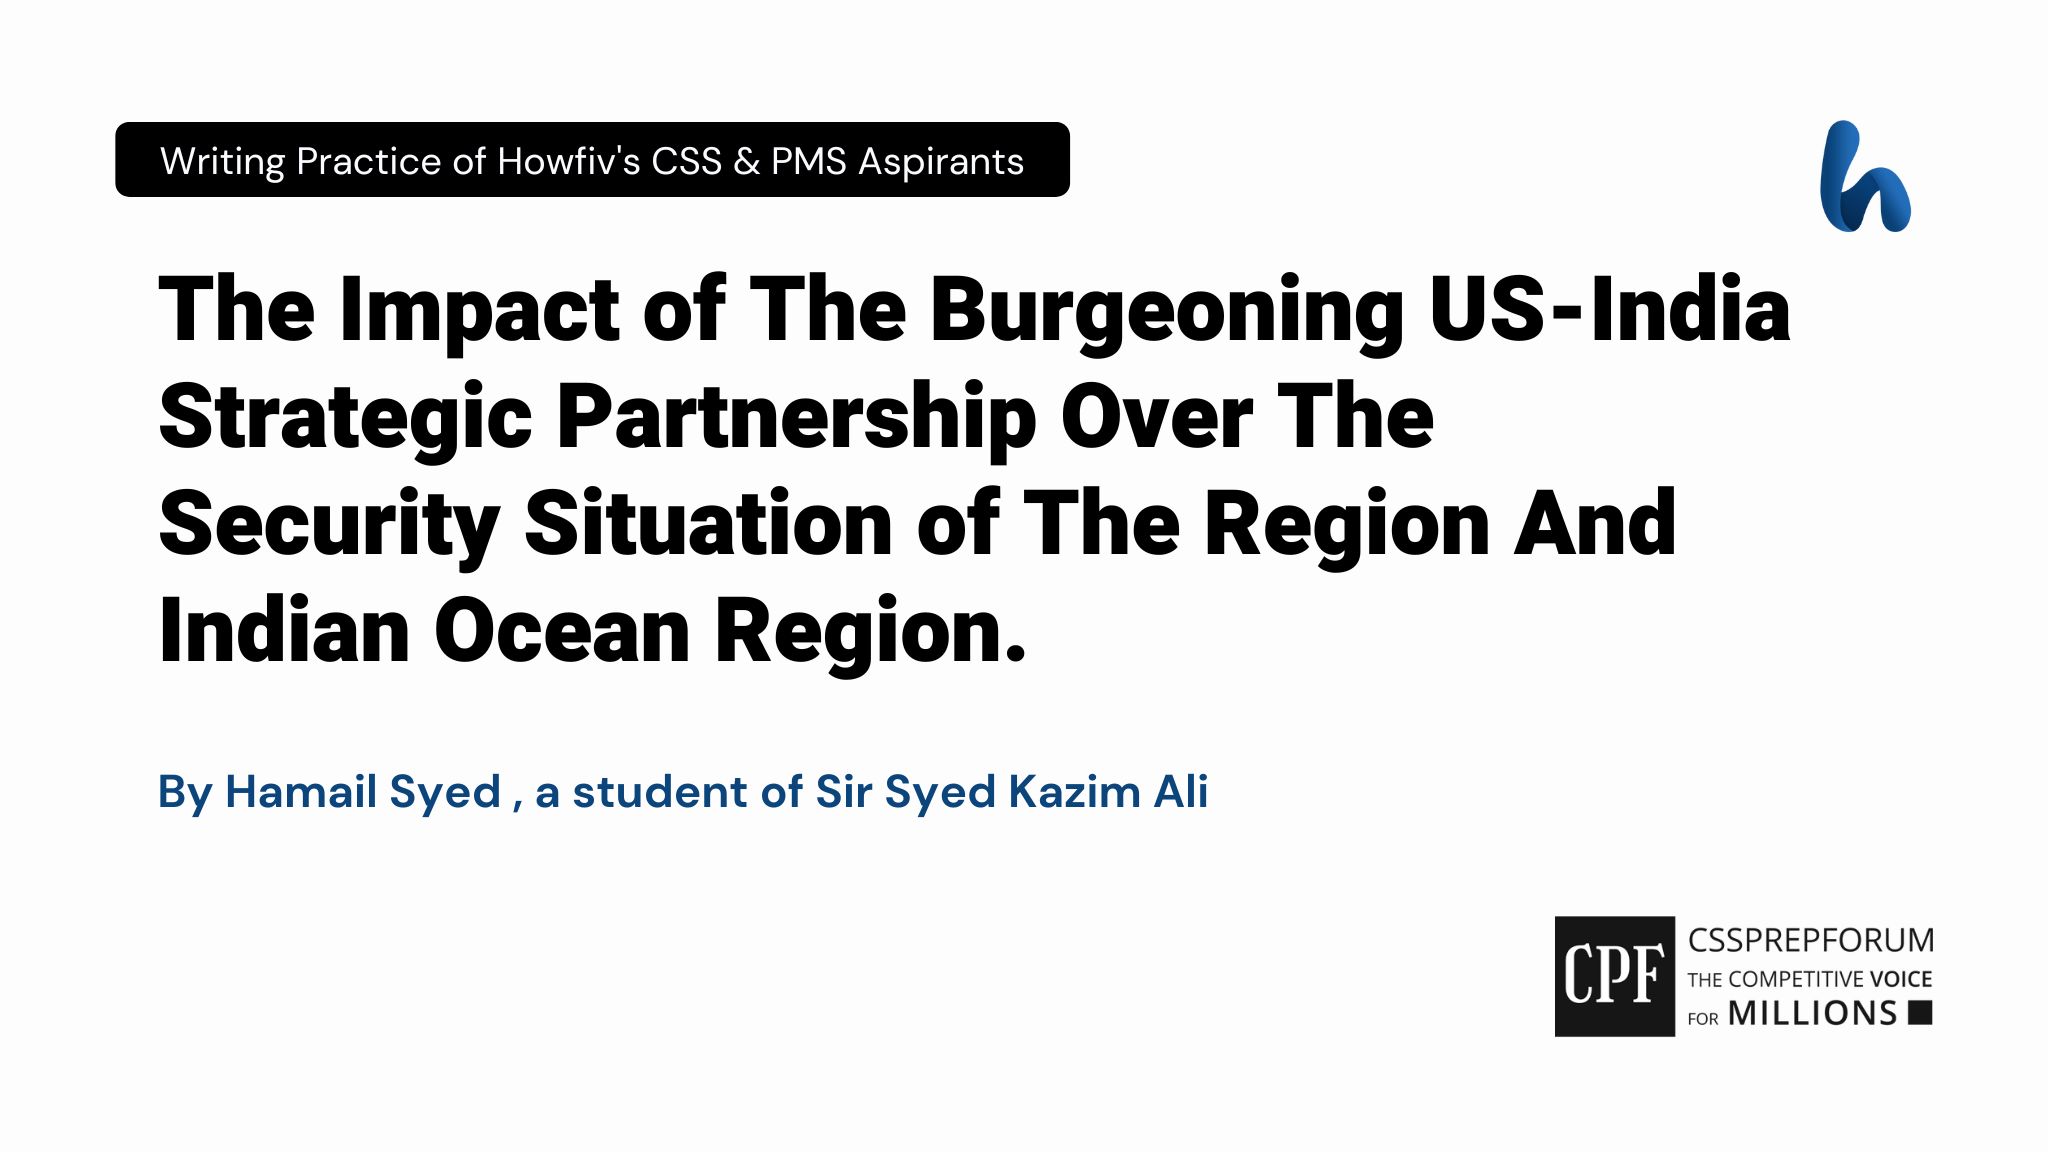 The Impact of The Burgeoning US-India Strategic Partnership Over The Security Situation of The Region And Indian Ocean Region.